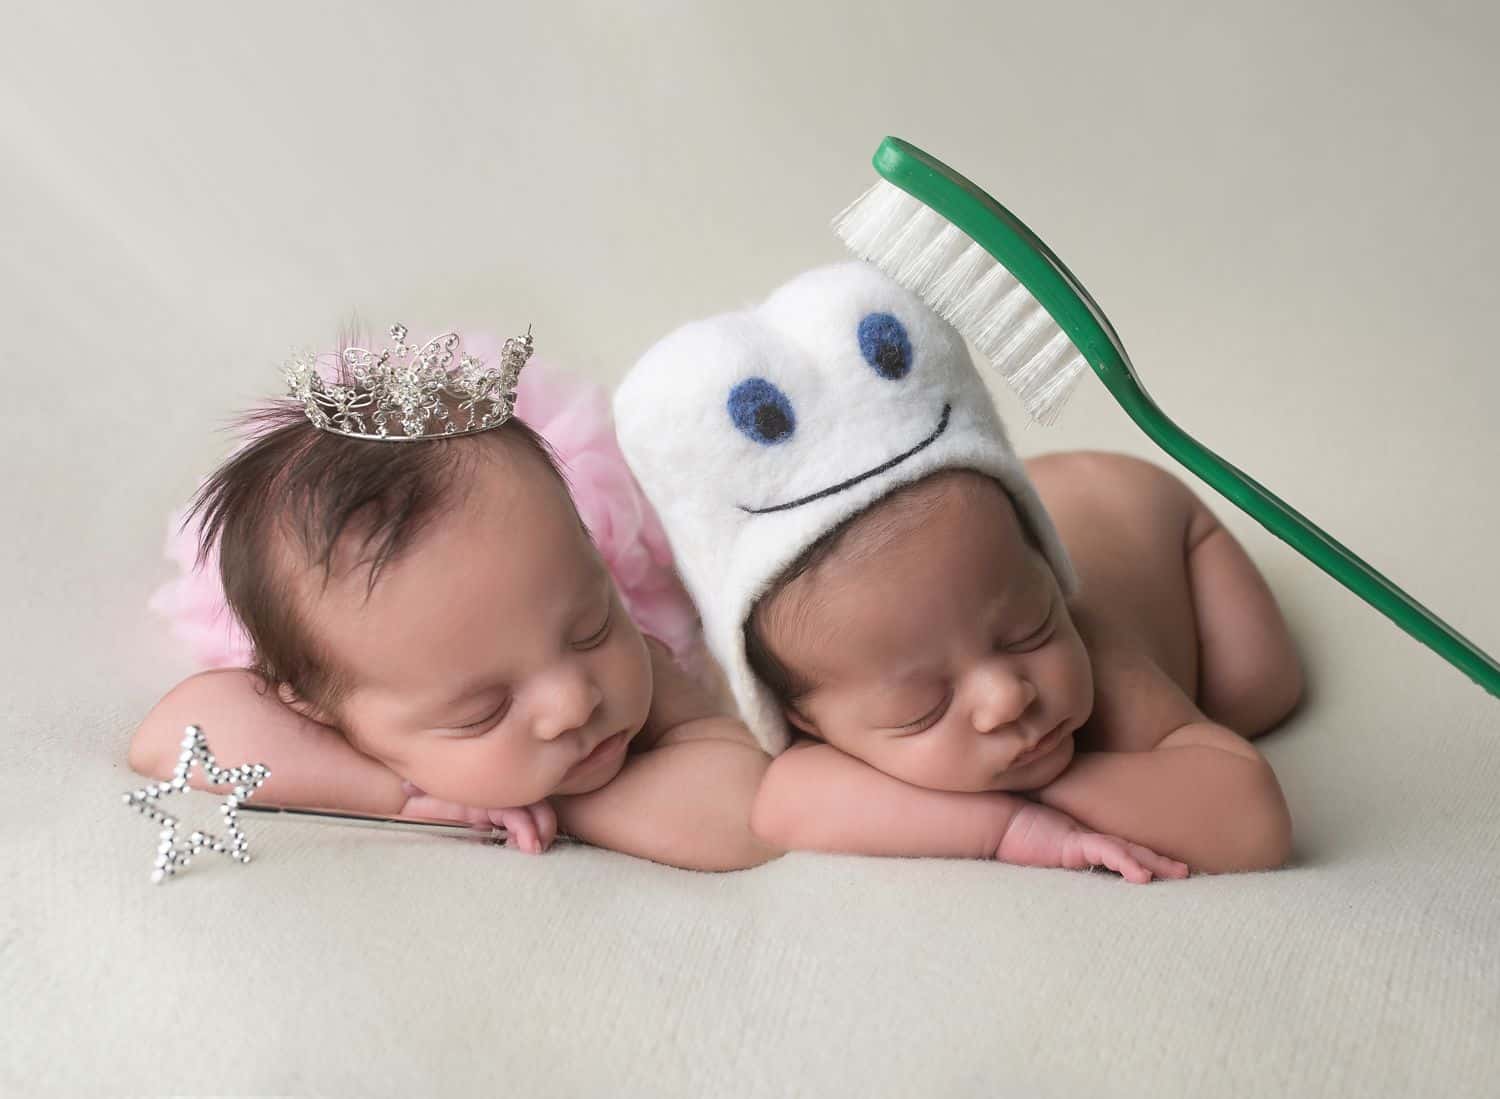 The best newborn photography props include a tiny tooth hat paired with an oversized green toothbrush, shown here on a baby boy. His twin sister wears a pink tutu and tiny tiara, and she holds a glittering wand in her hand as she sleeps.